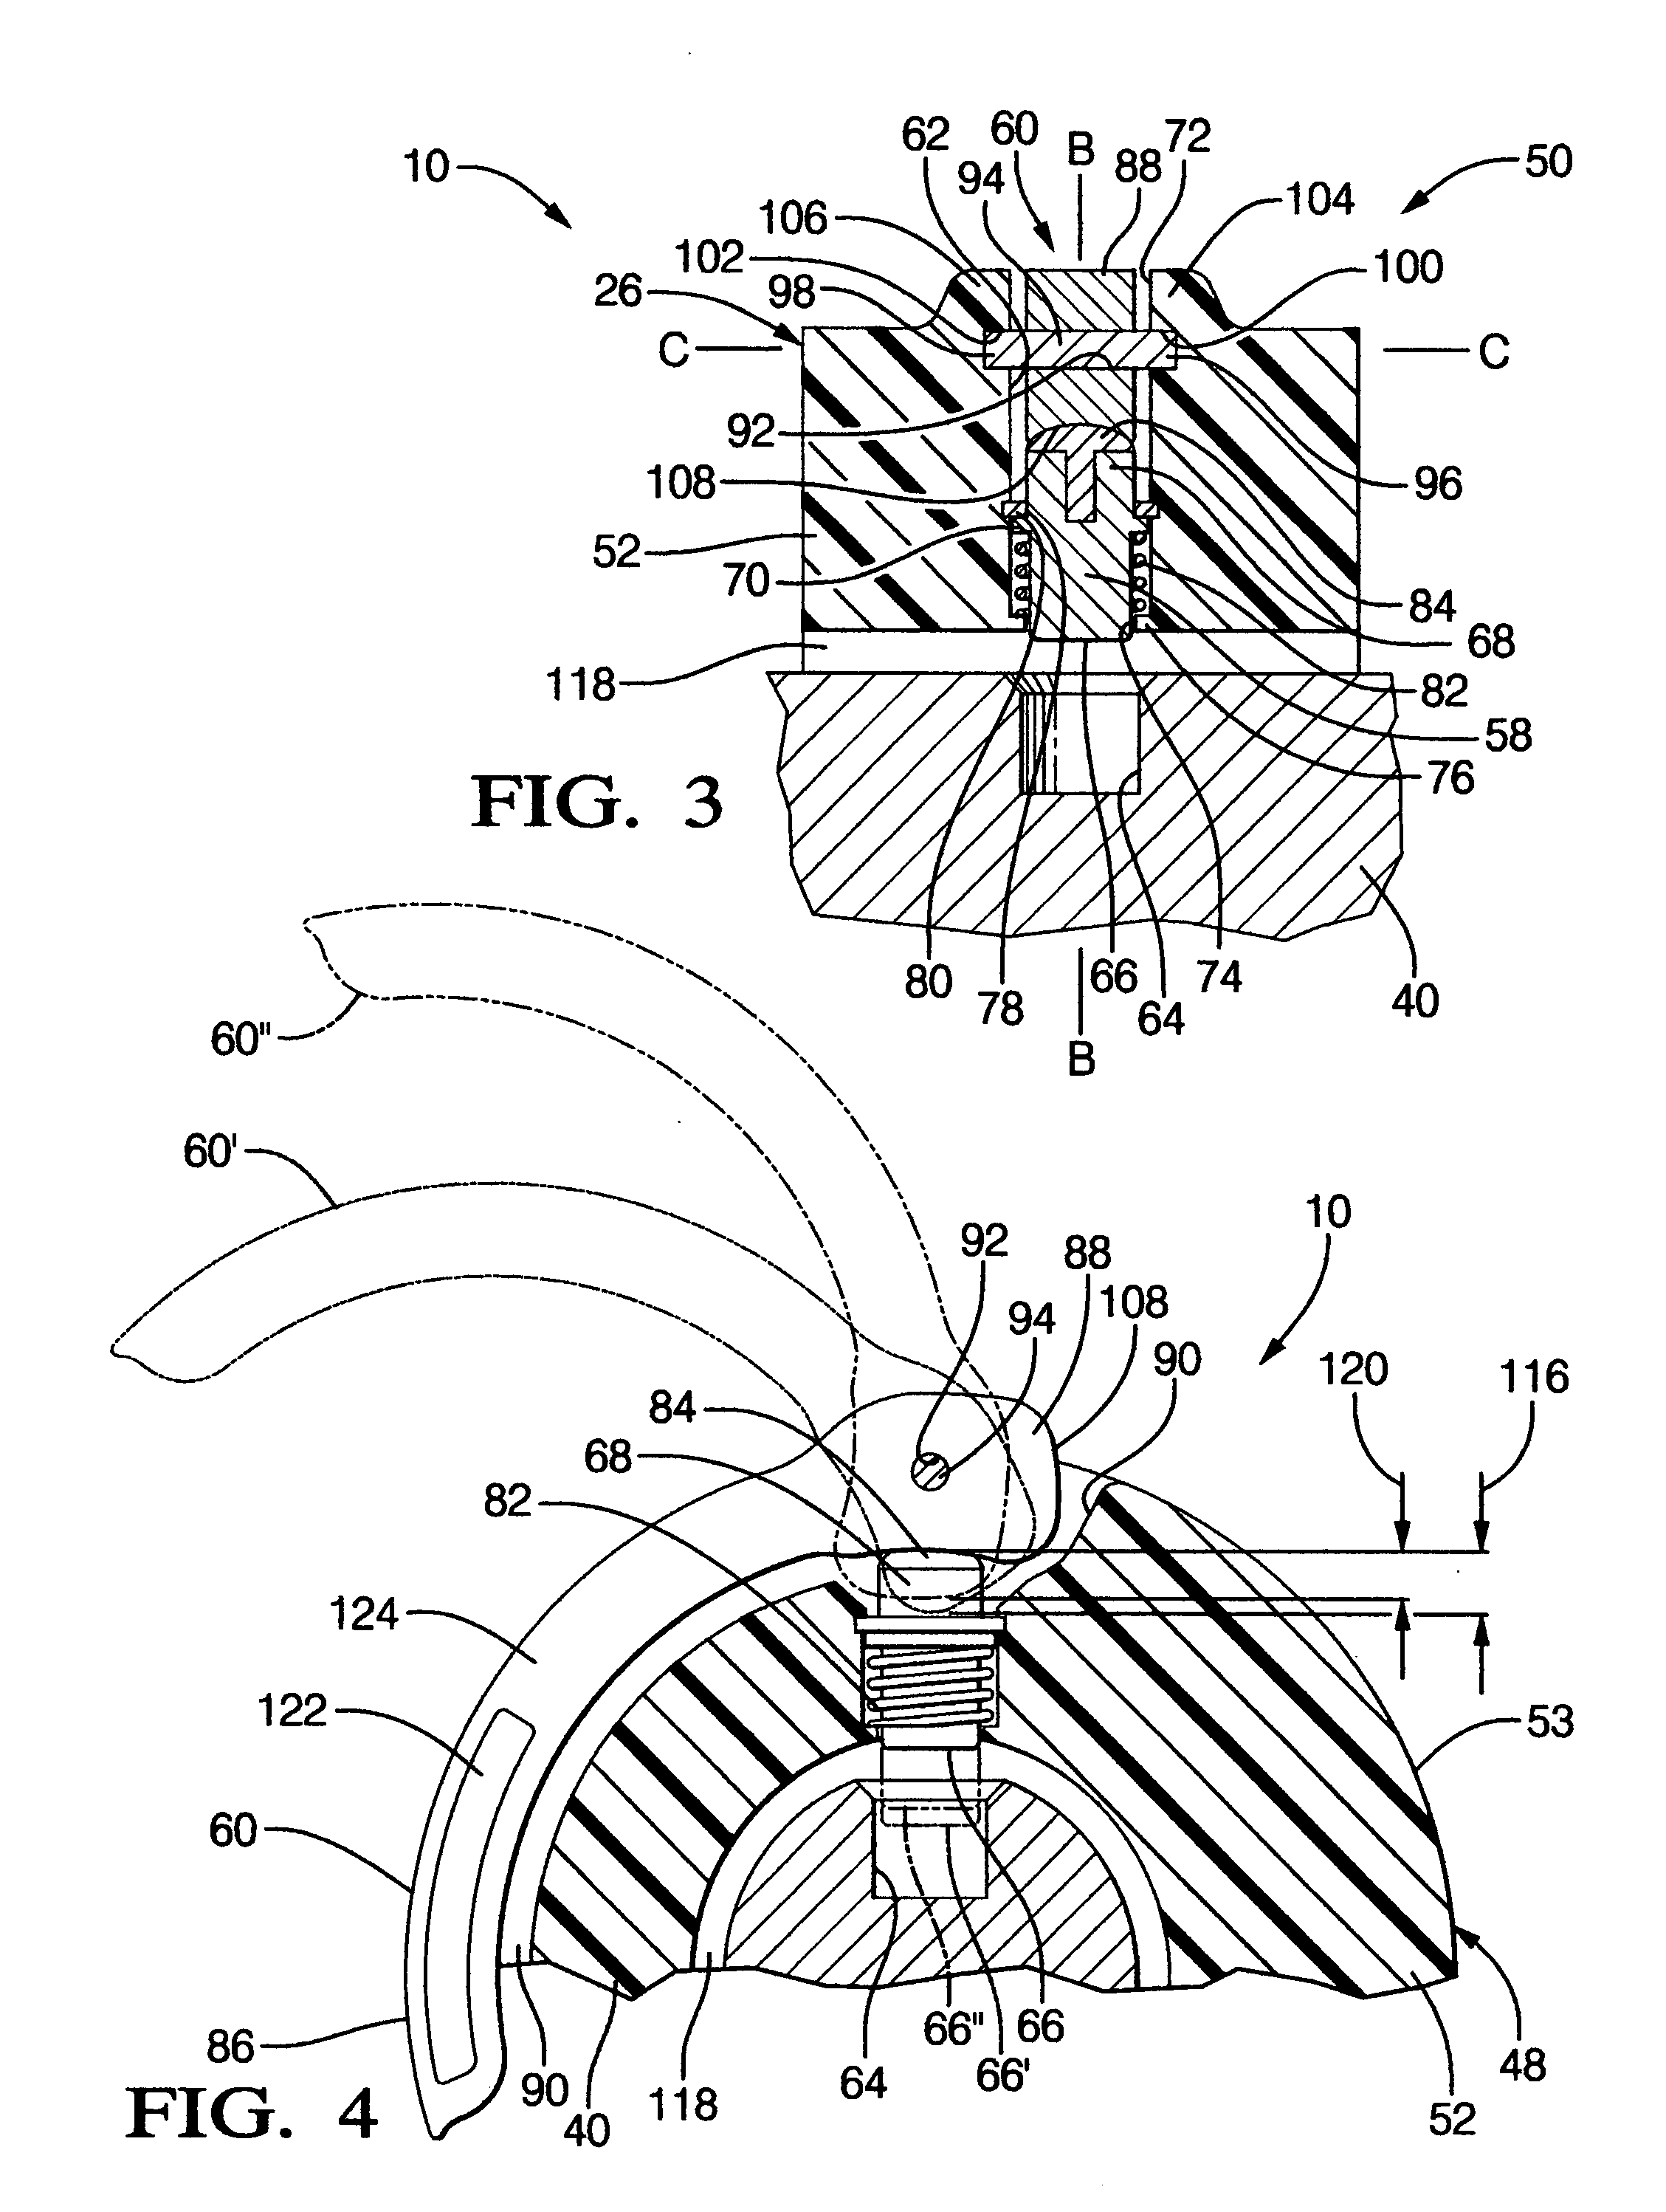 Power tool with spindle lock